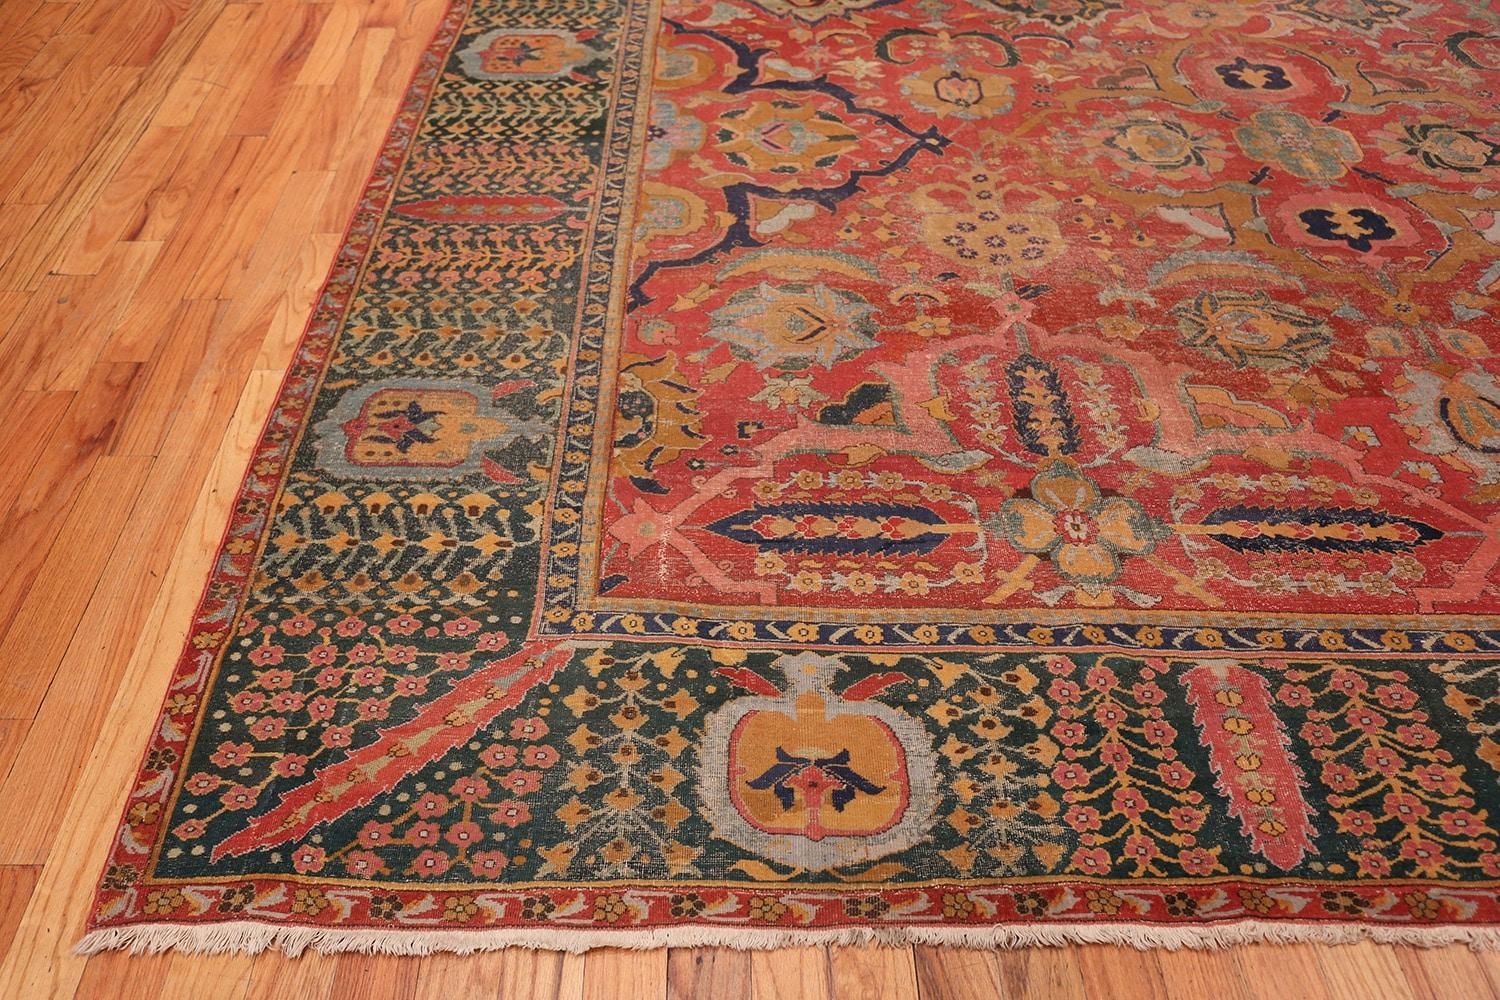 17th Century Antique Persian Isfahan Rug. Size: 11 ft 10 in x 18 ft 1 in 1